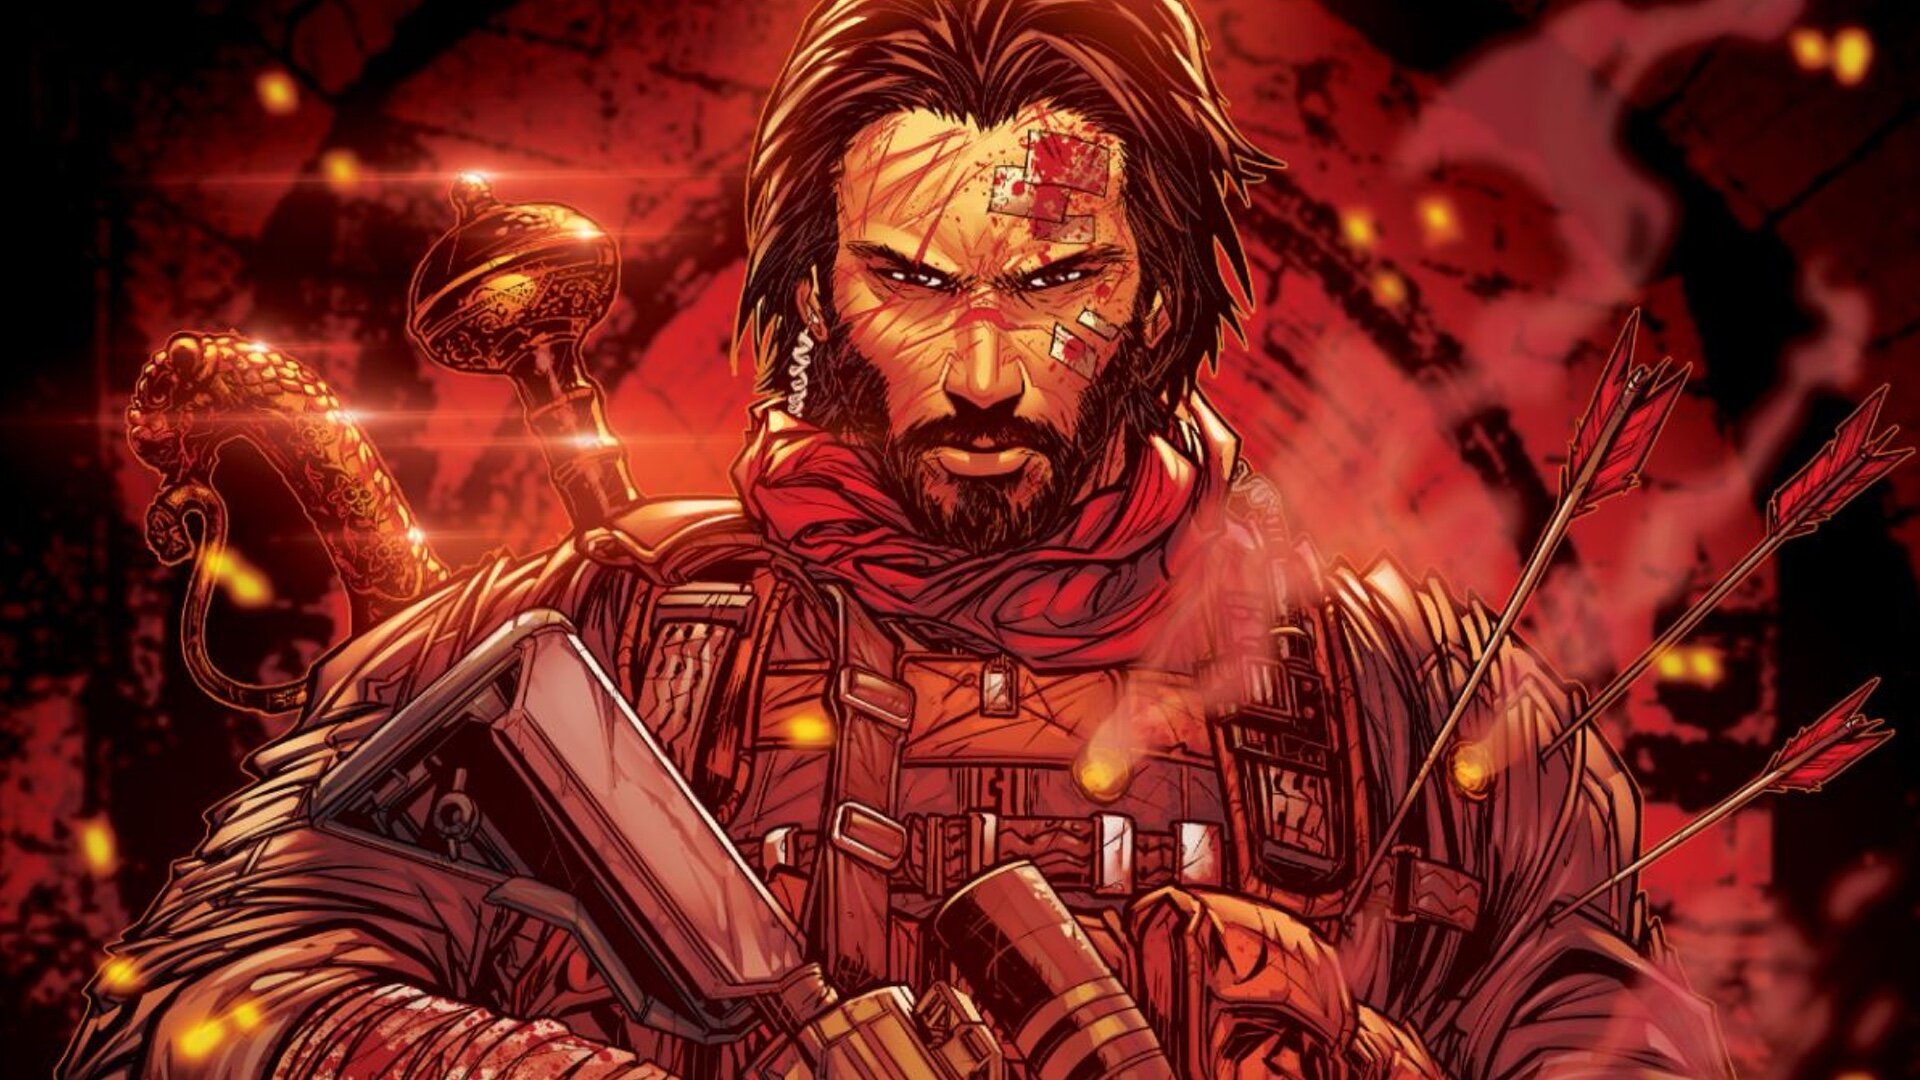 keanu reeves set to star in the film adaptation of his comic series brzrkr